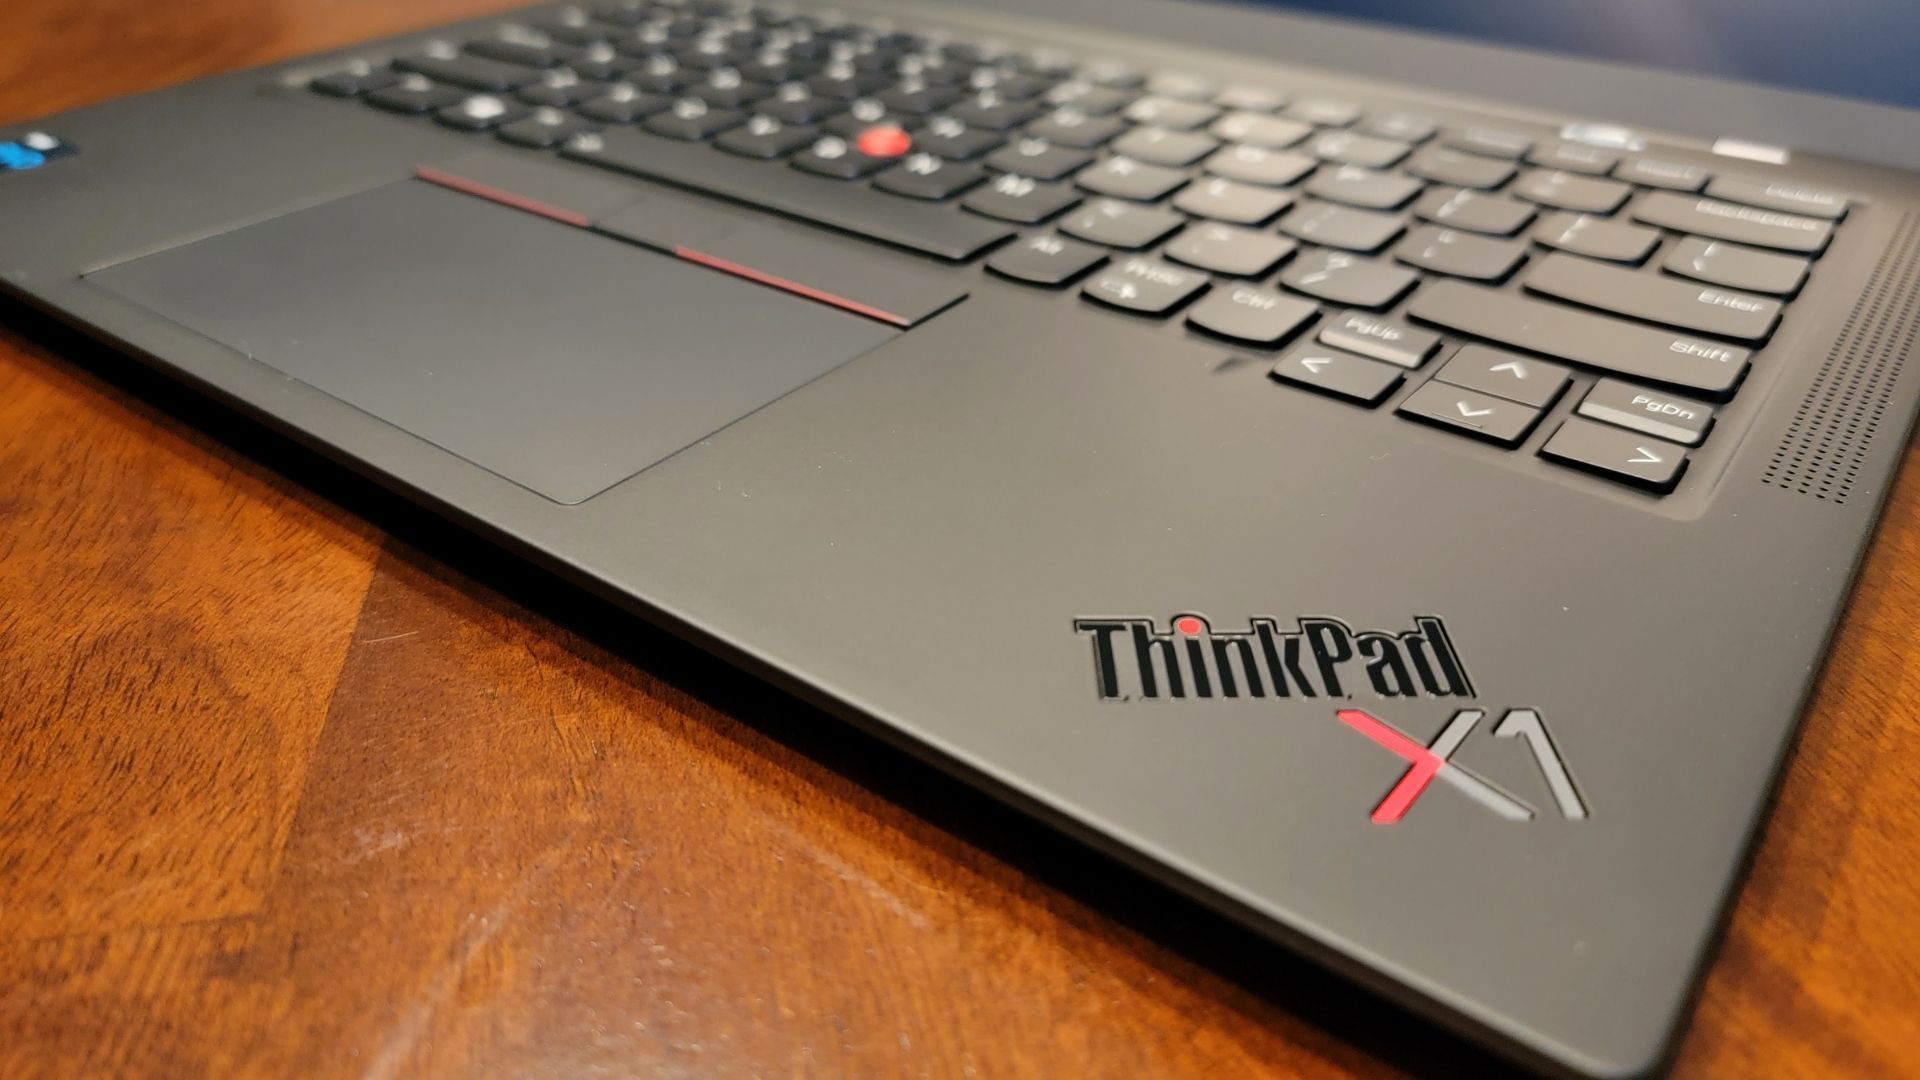 Lenovo ThinkPad X1 Carbon 9th gen laptop on a wooden table, focusing in on the Thinkpad X1 logo